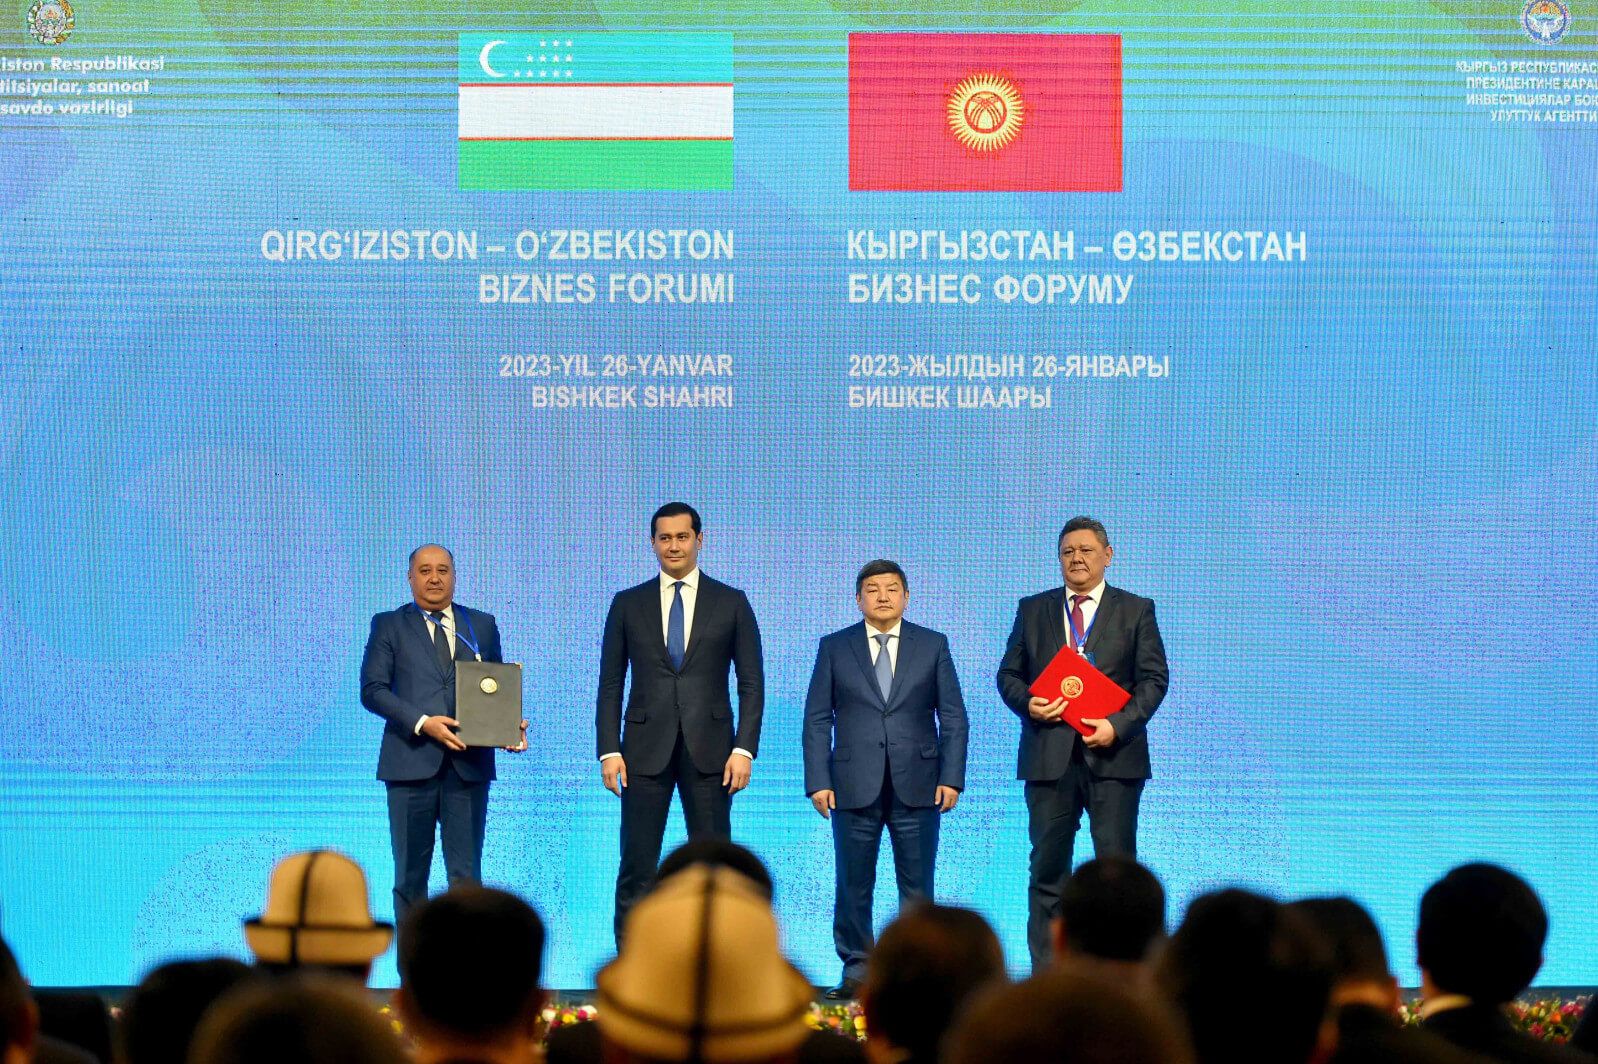 Documents for 168 million US dollars were signed at the “Kyrgyzstan-Uzbekistan” business forum